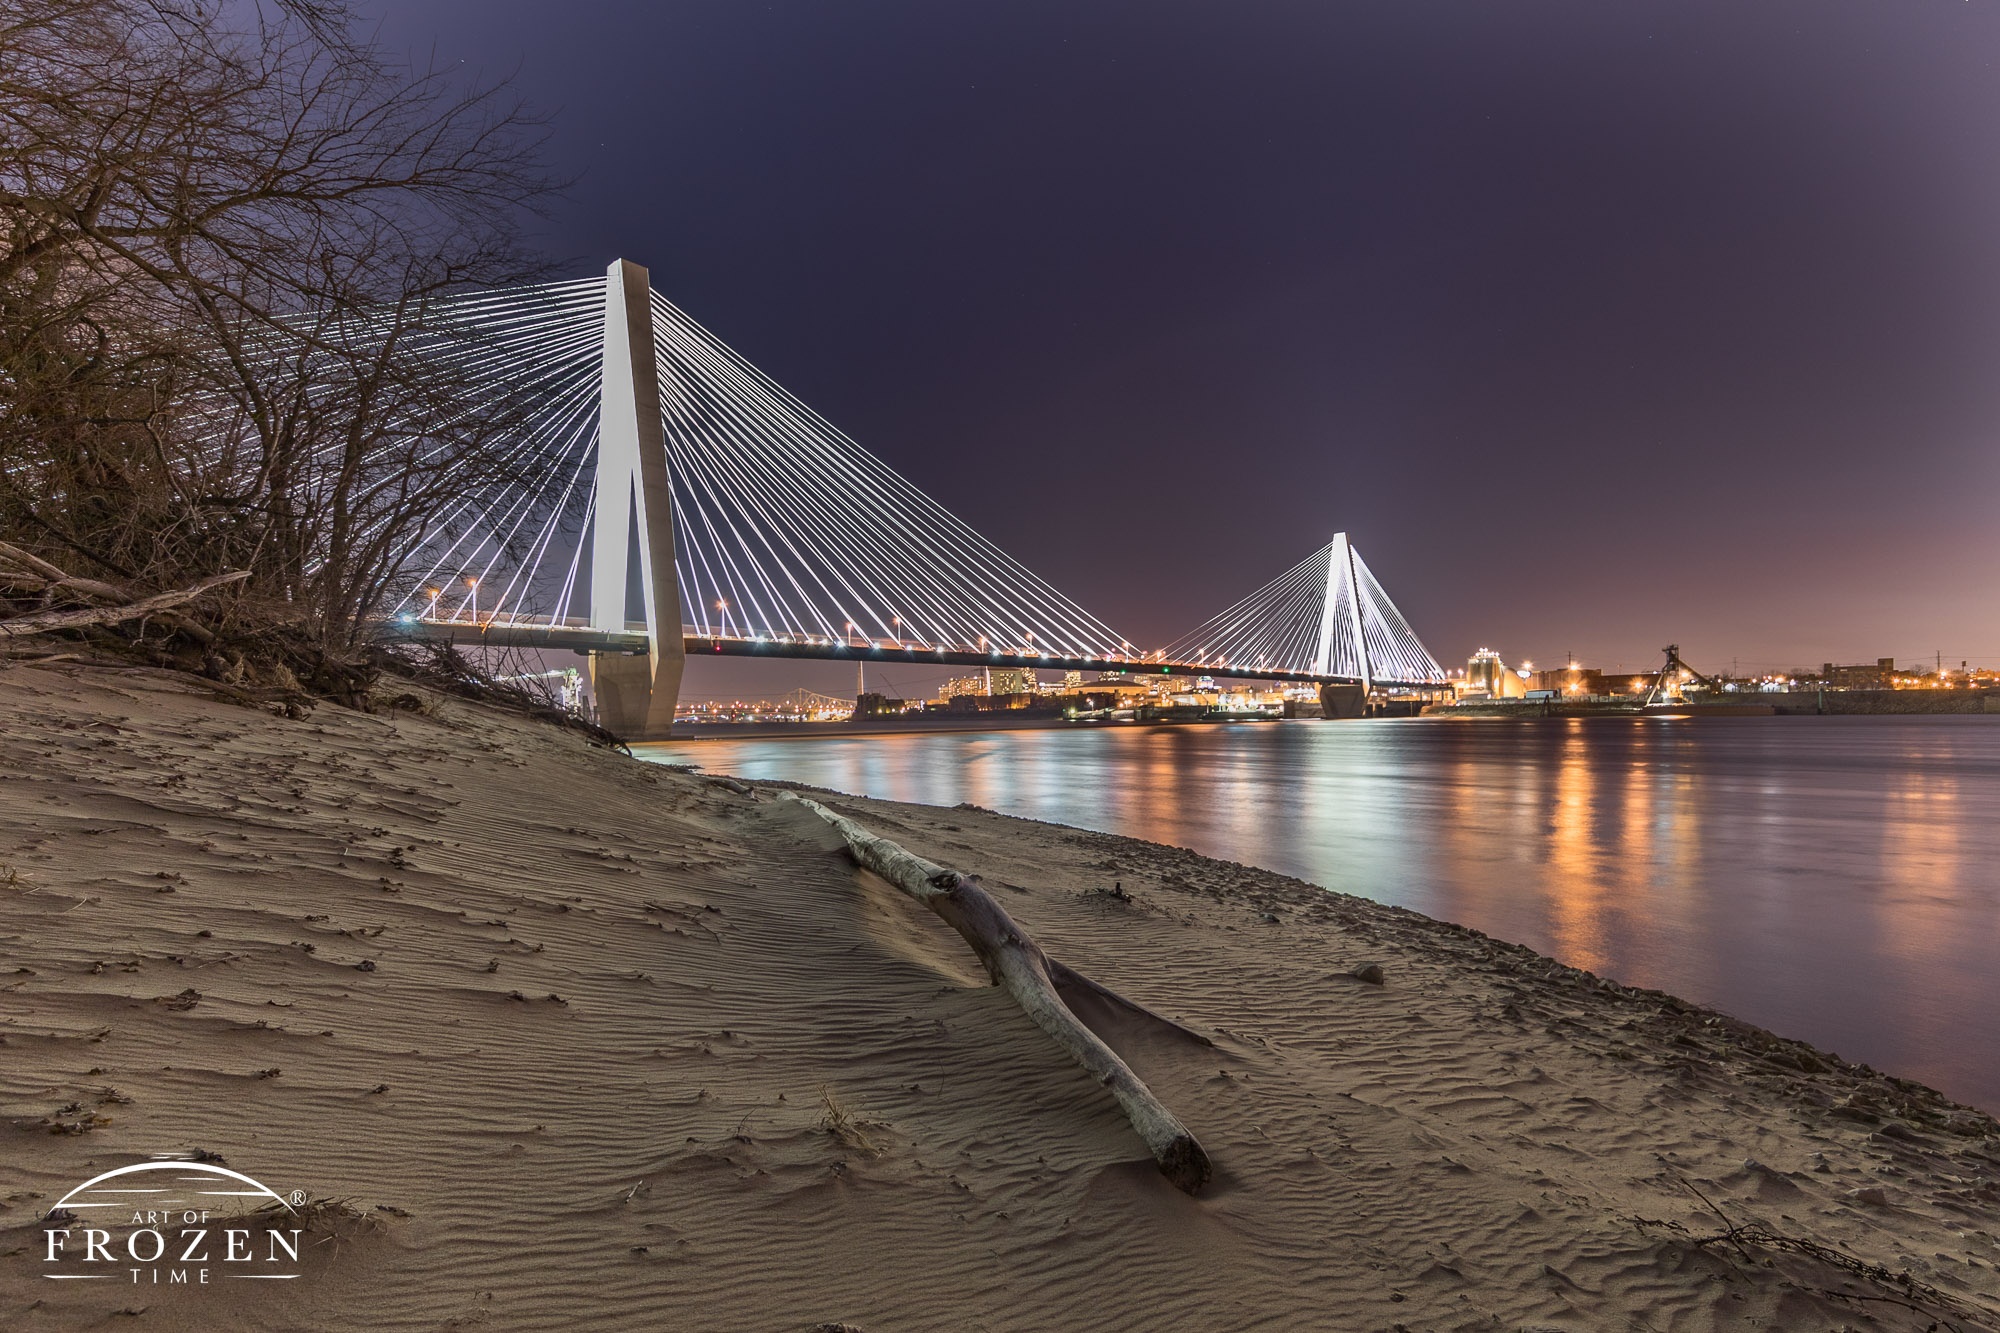 A nightscape of St Louis’s iconic cable-stayed bridge which crosses the Mississippi River